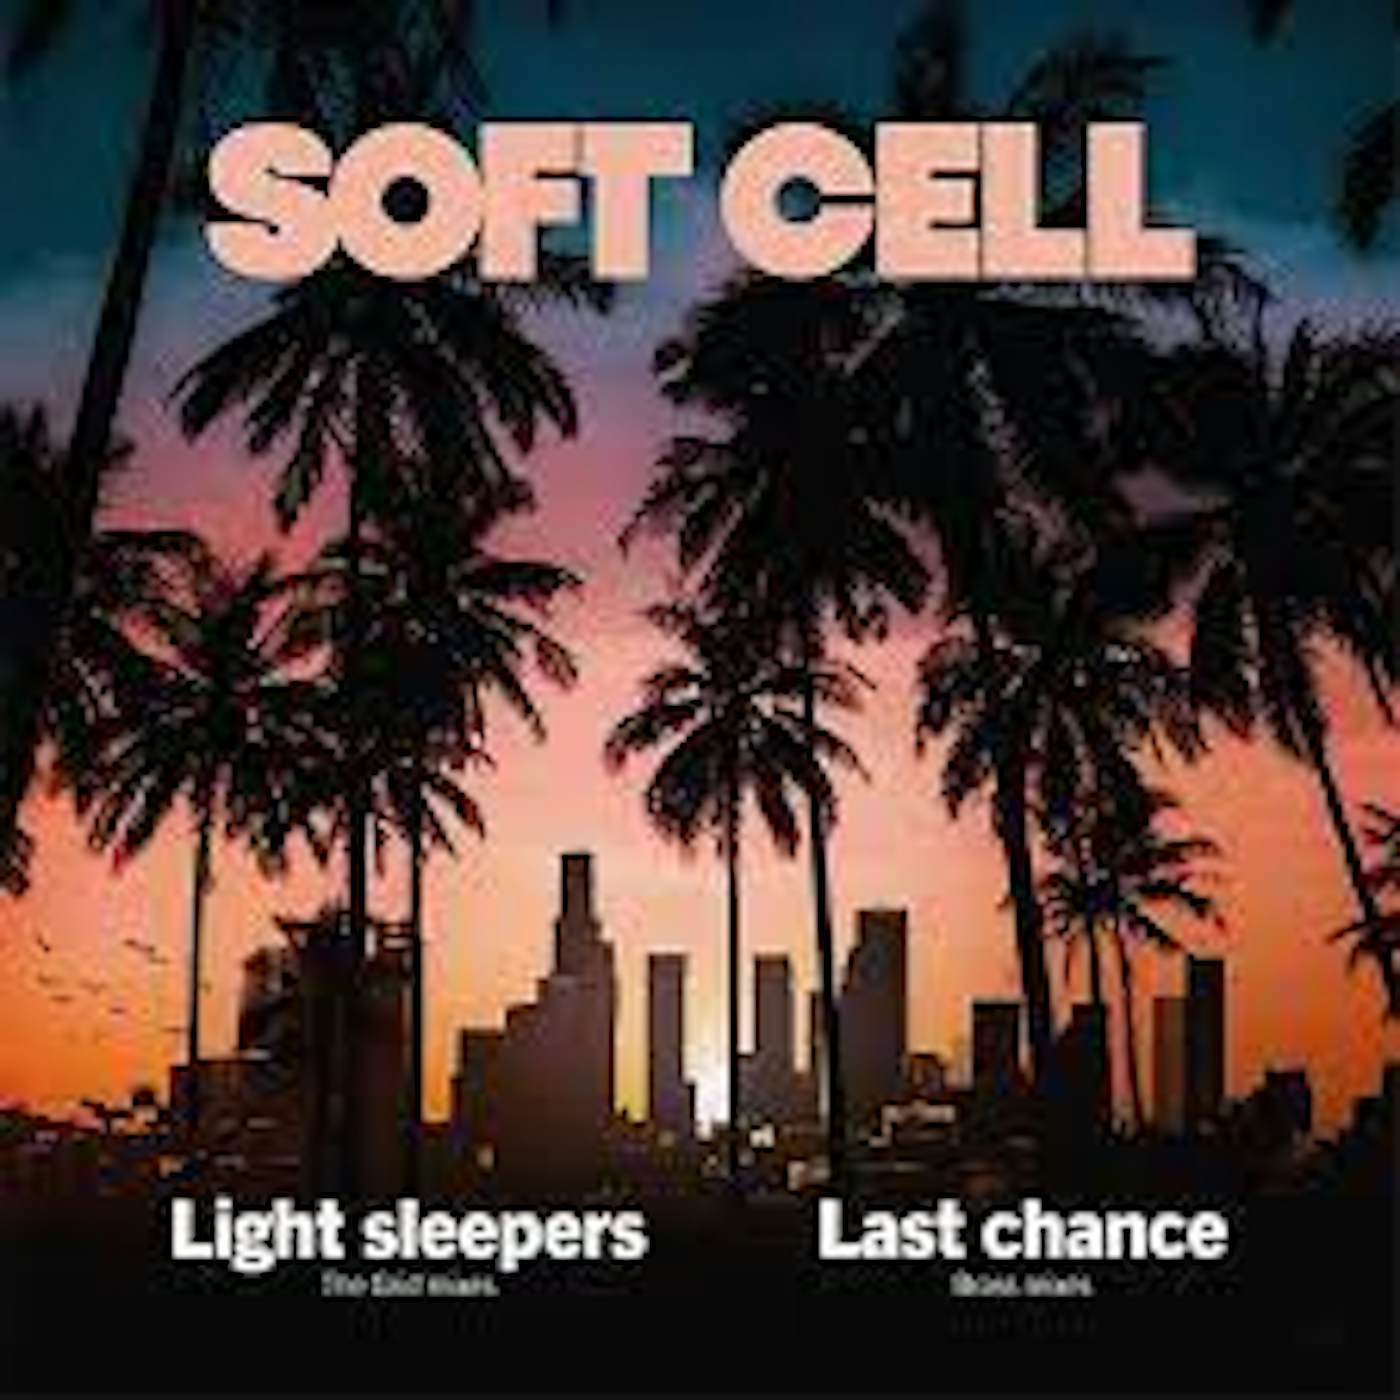 Soft Cell - Light Sleepers 12"